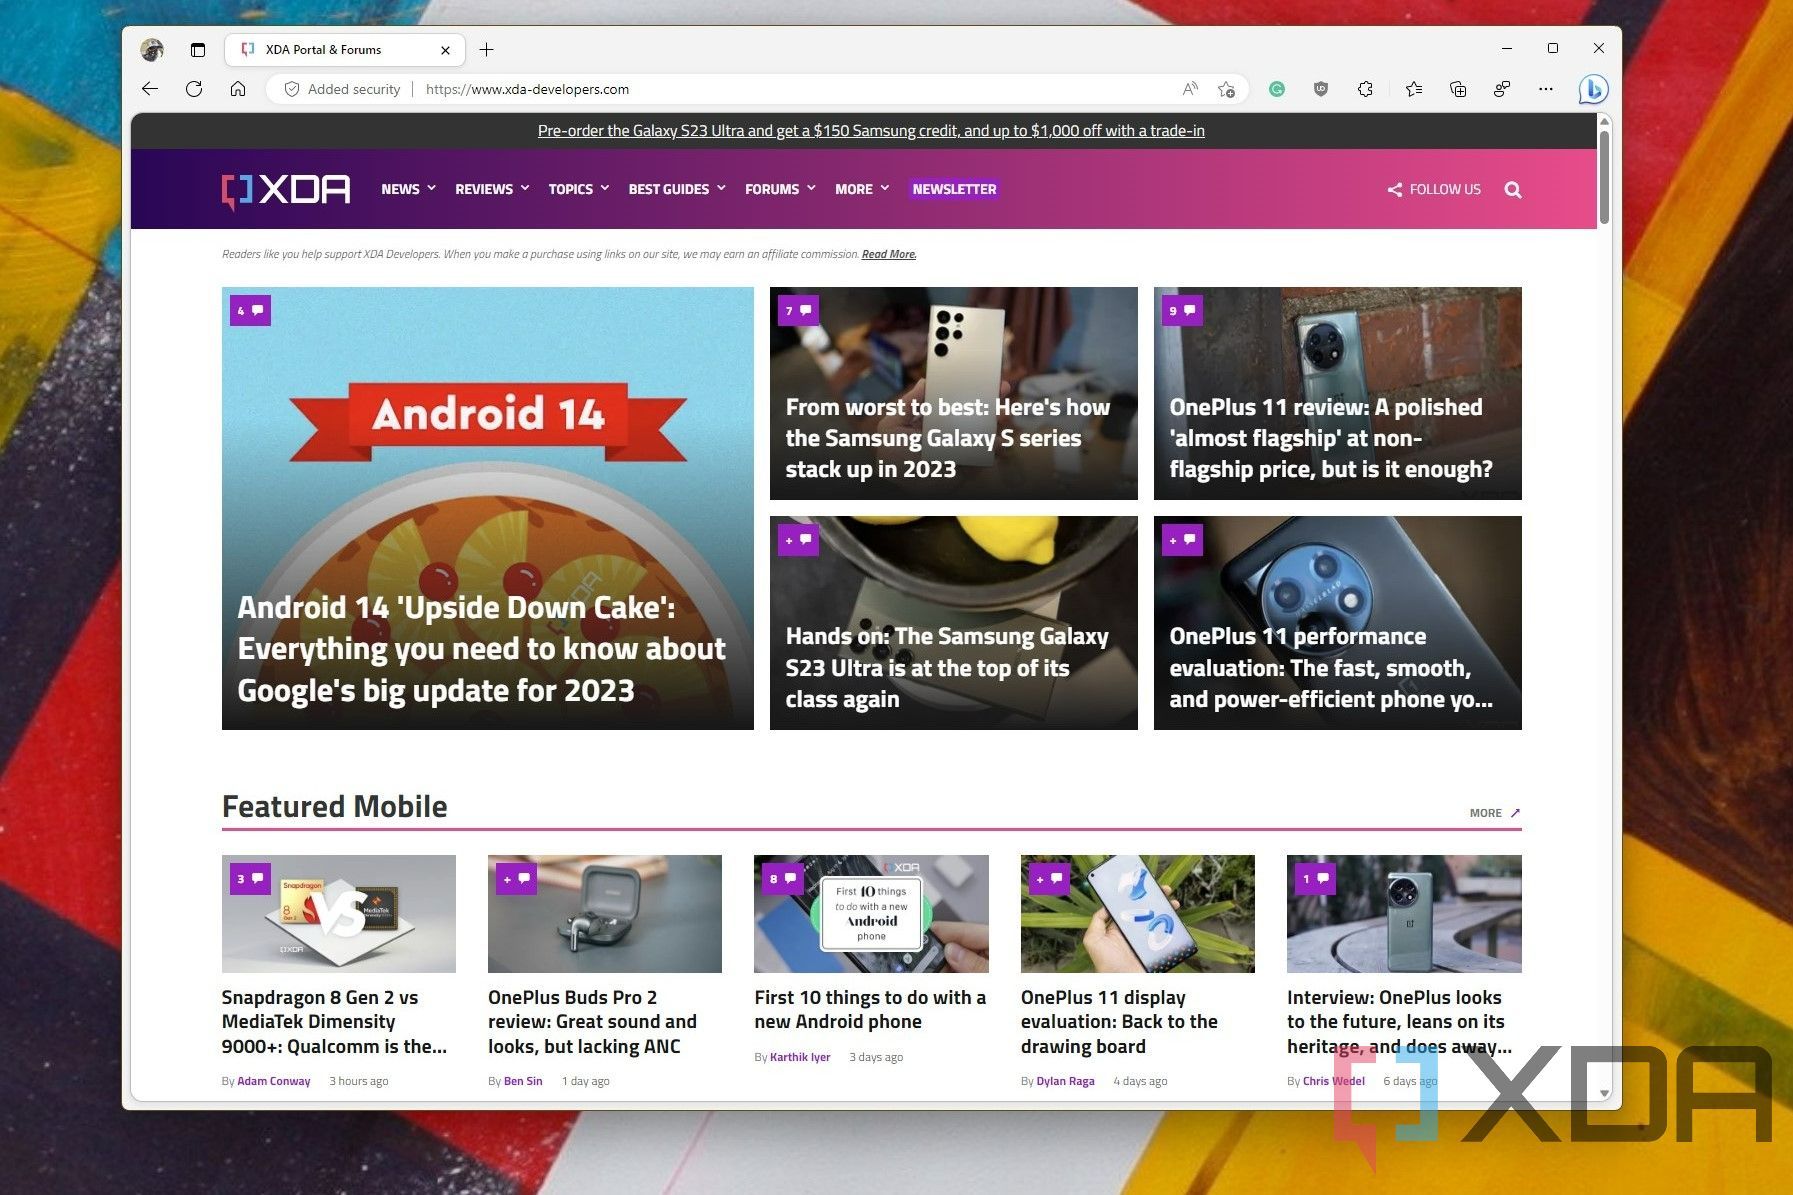 The XDA homepage open in Edge